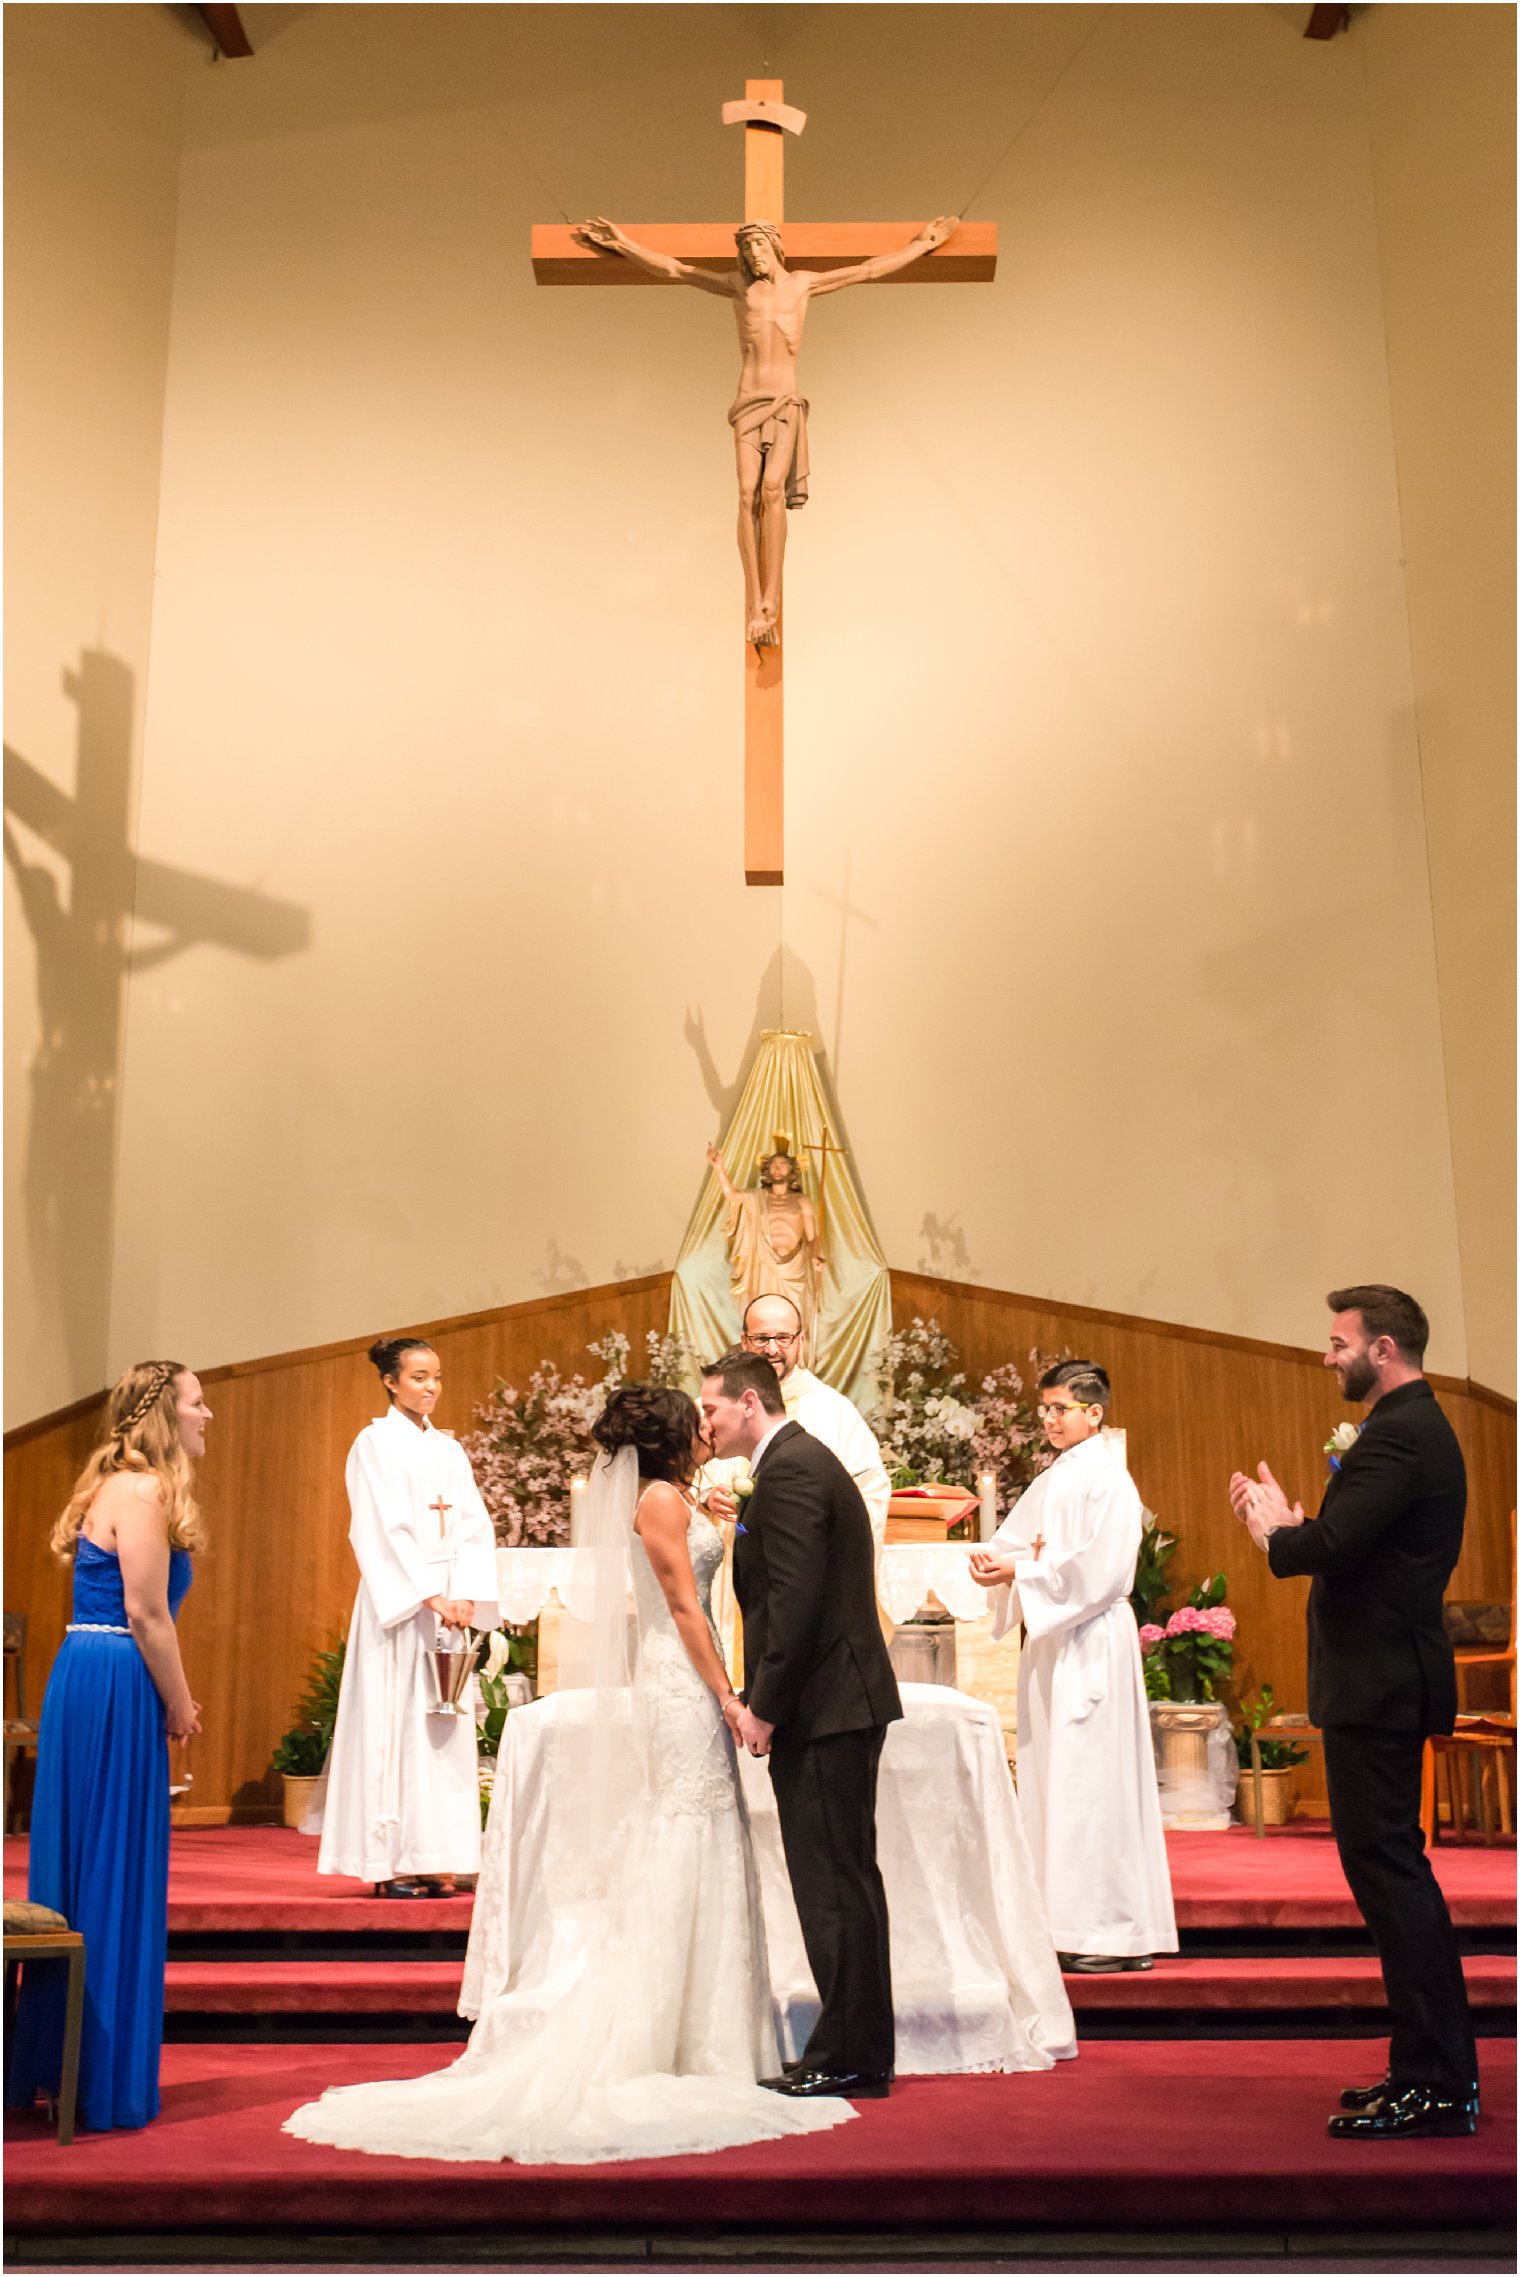 First kiss during wedding ceremony at St. Helena's Roman Catholic Church